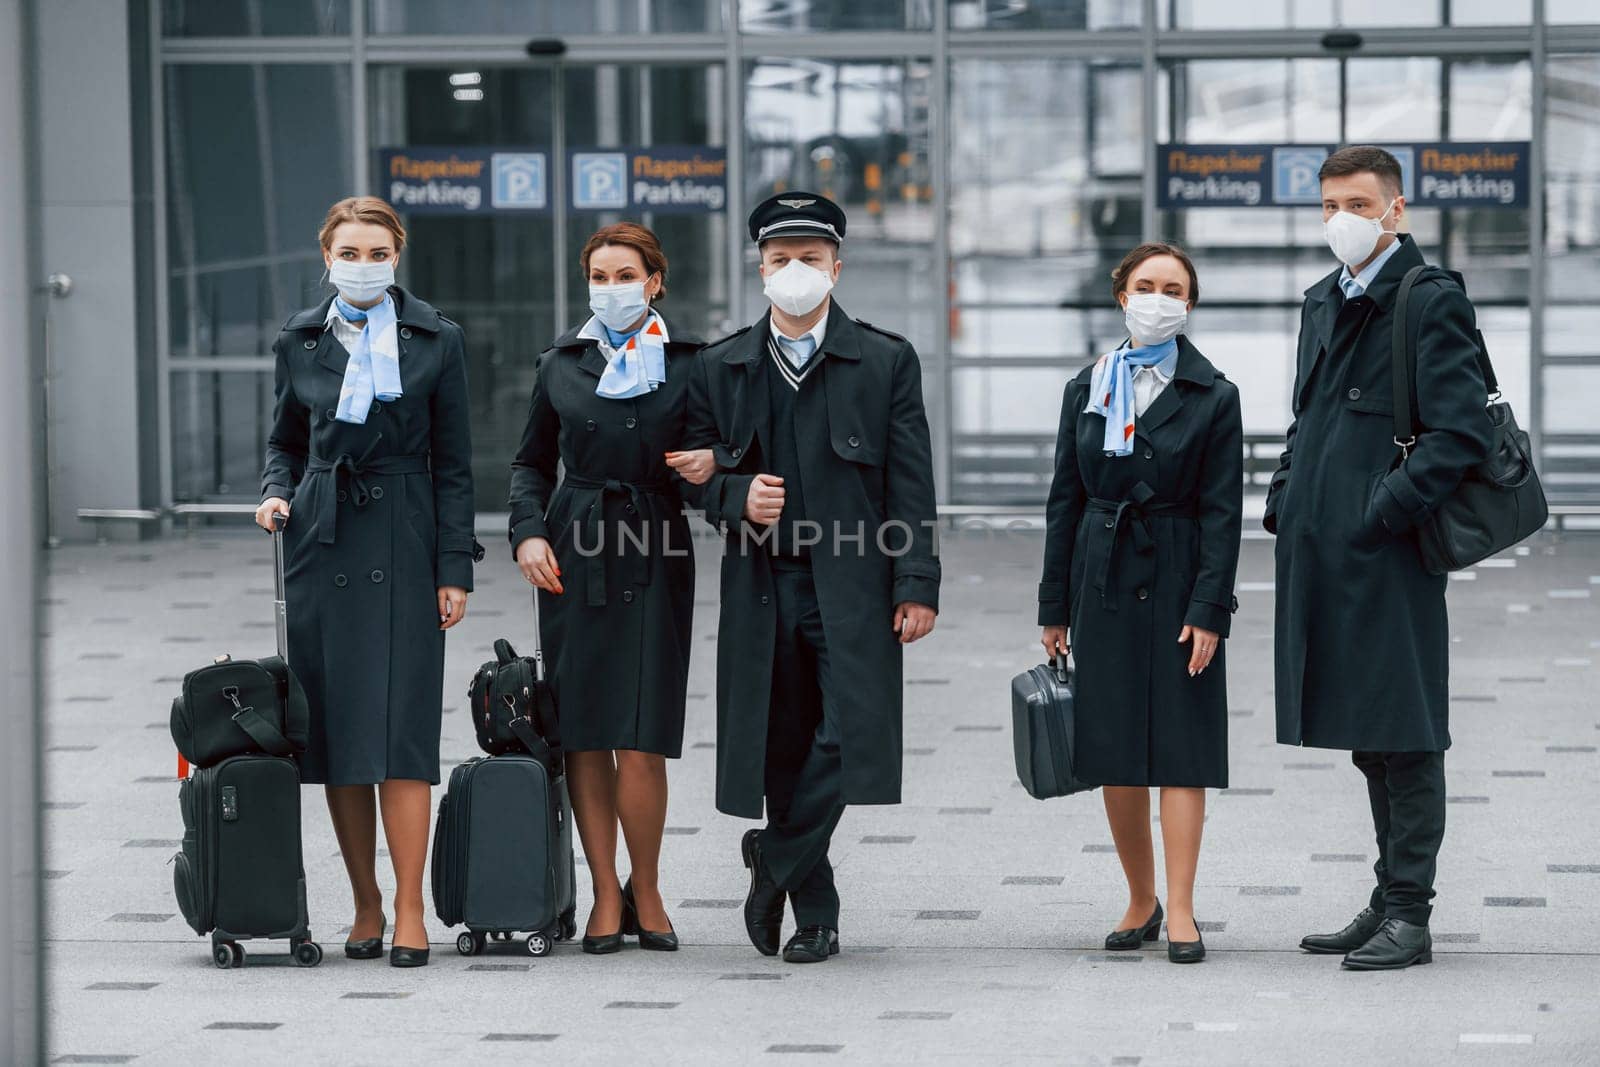 Aircraft crew in work uniform is together outdoors in the airport by Standret